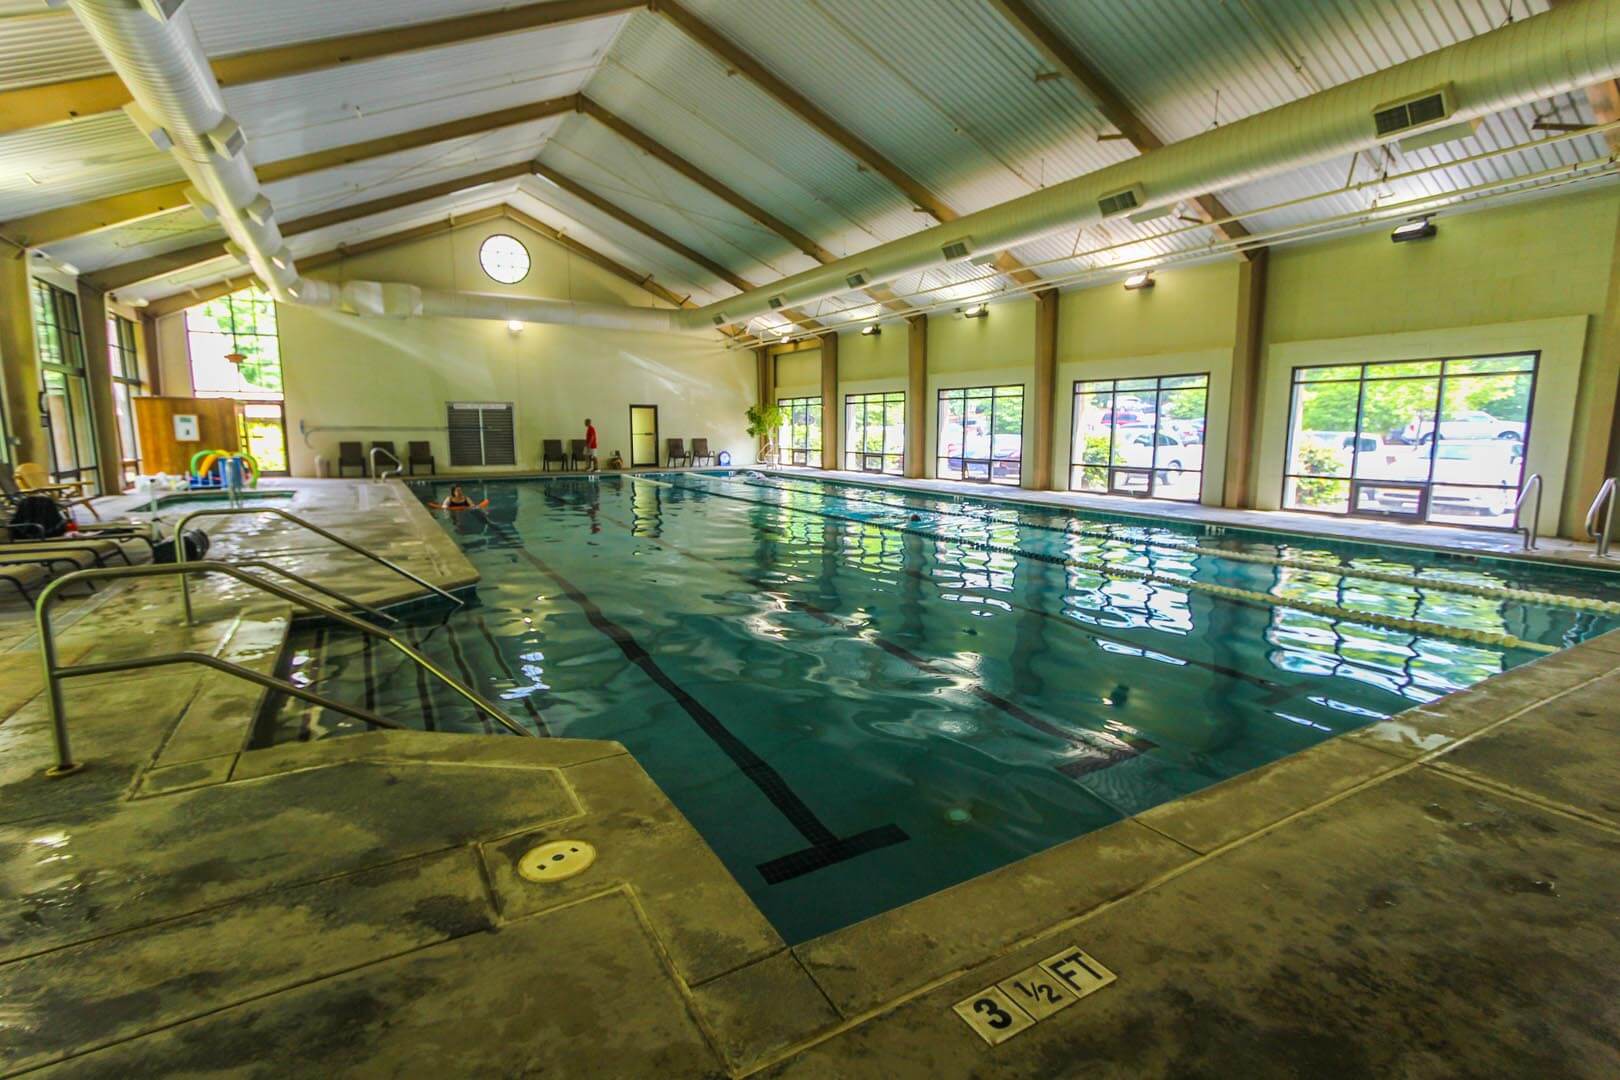 An expansive indoor swimming pool at VRI's Golf Club Villas in Marble Hill, Georgia.